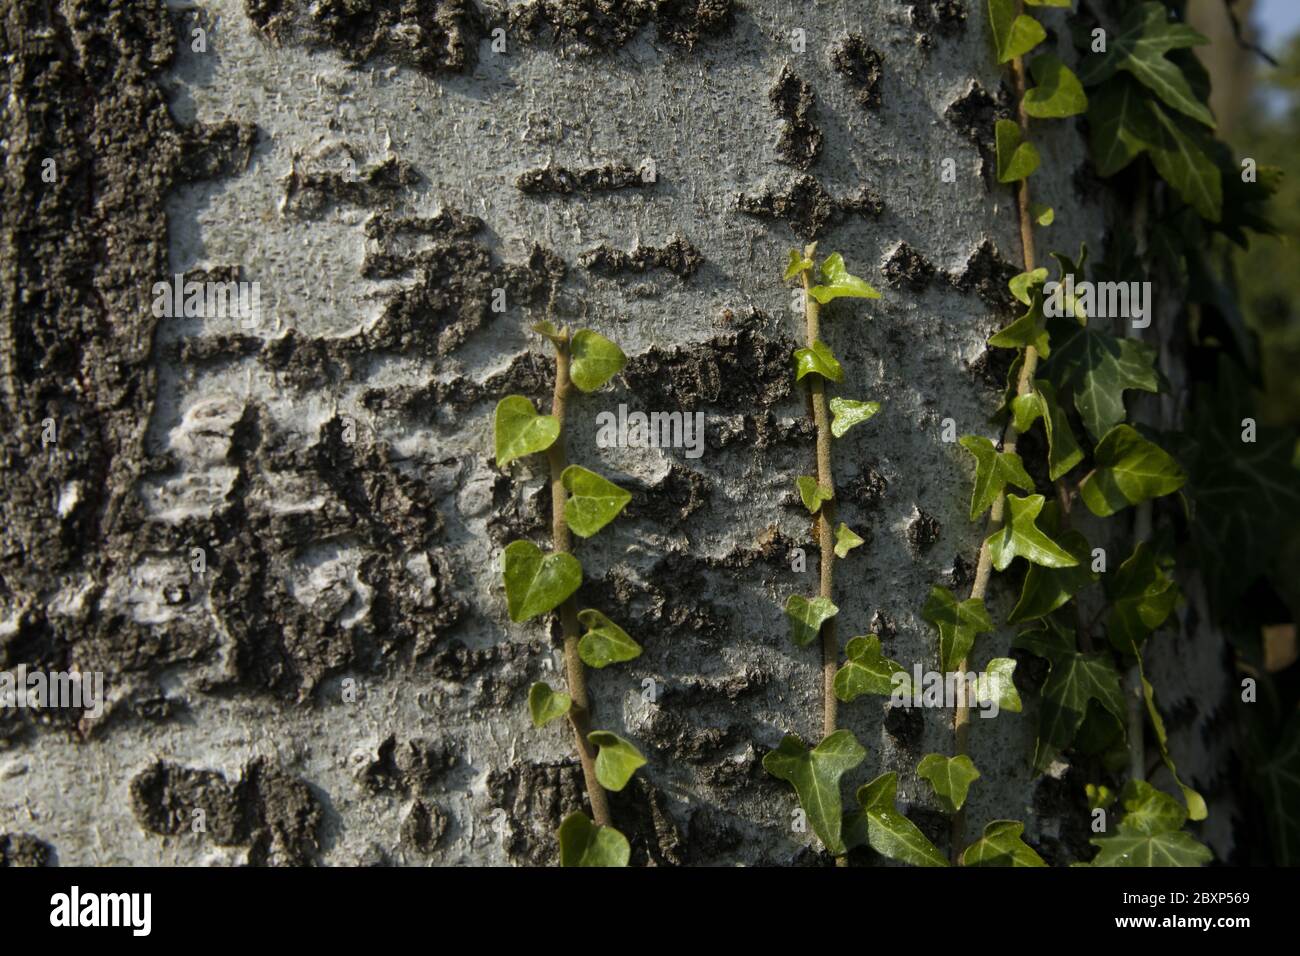 Ivy in leaves - Climbing plant on a tree trunk with low light at sunset Stock Photo